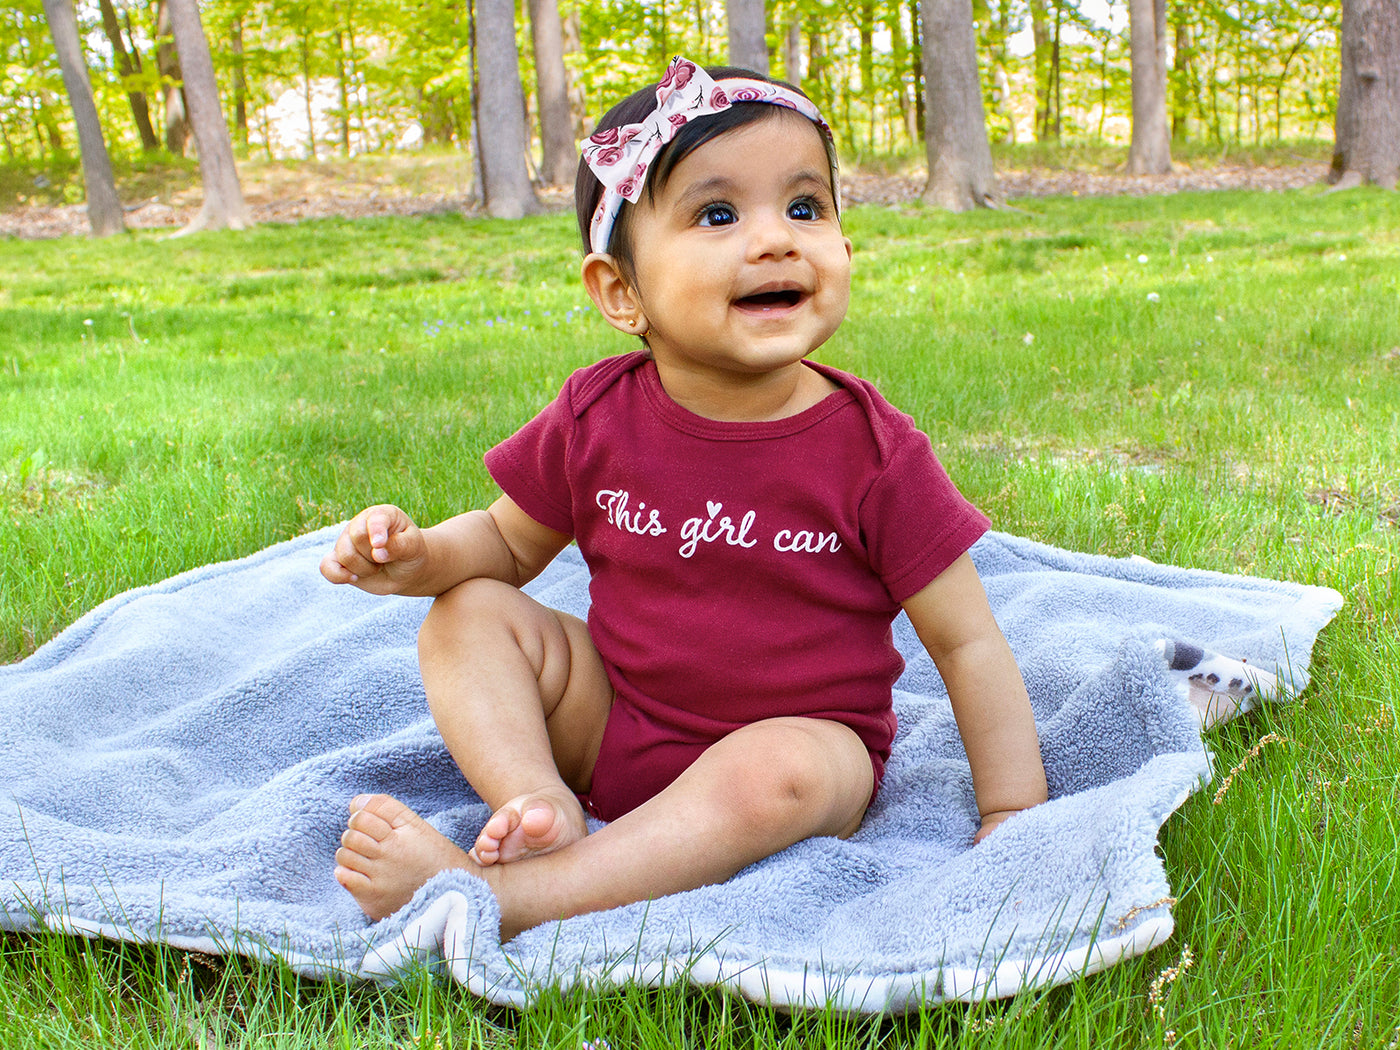 Baby Clothes, Toddler Clothing, Accessories and Registry – BabyMallOnline.com